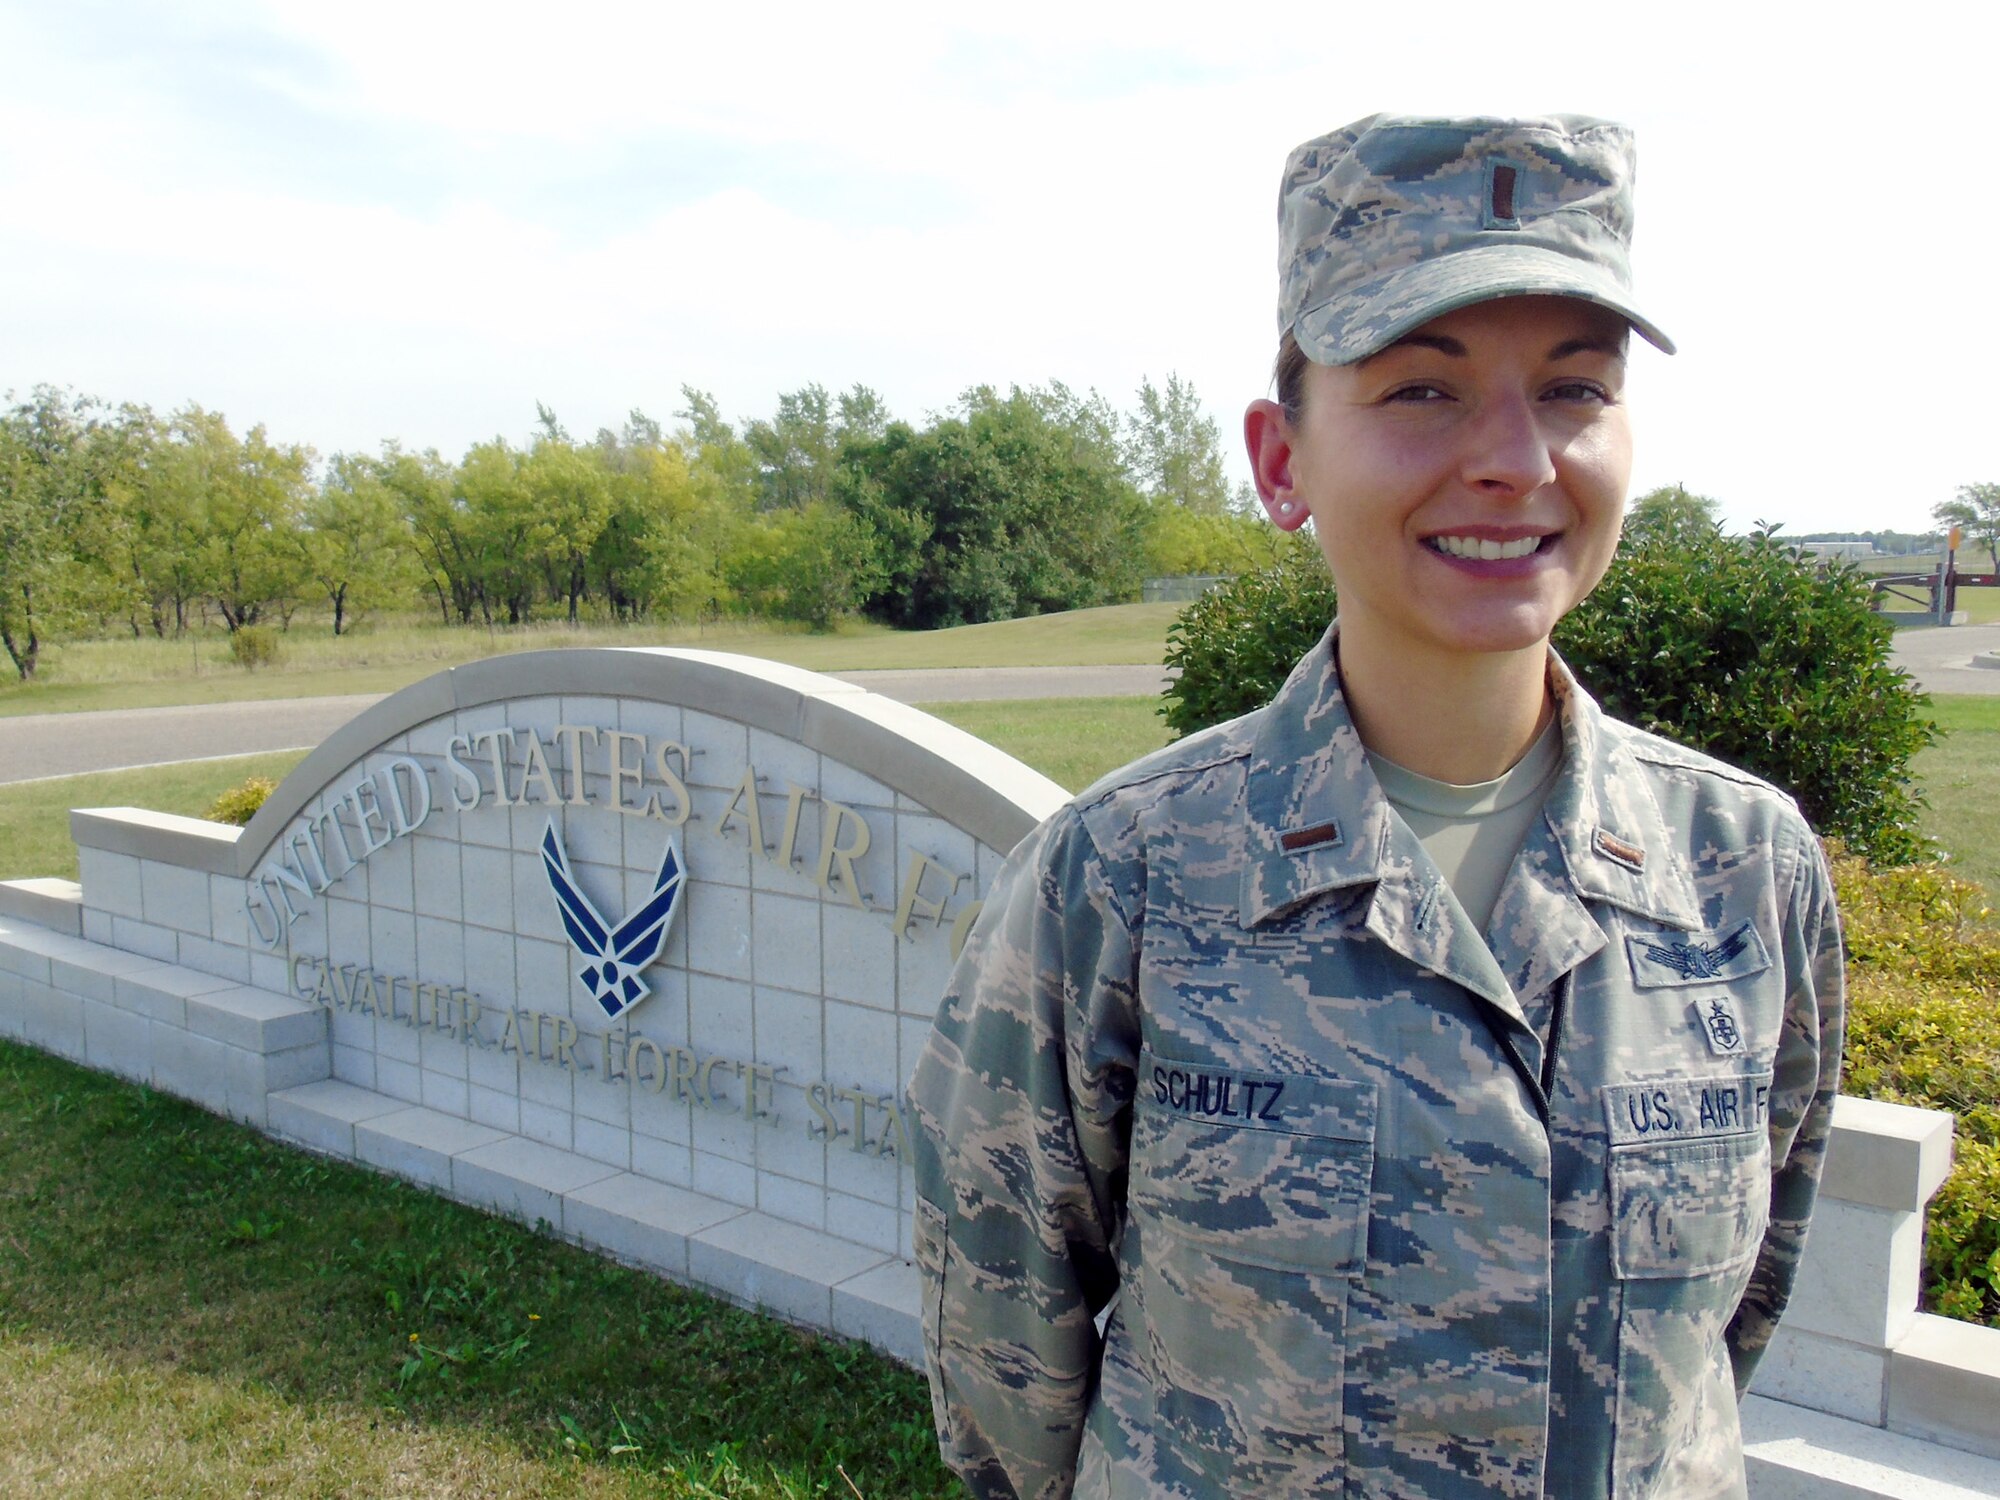 2nd Lt. Emily Schultz, 10th Space Warning Squadron crew commander, poses in front of the base sign at Cavalier Air Force Station, North Dakota, Aug. 31, 2015. Schultz was named the Warrior of the Week for the first week of September 2015. (Courtesy photo by 2nd Lt. Brandy Benesch/Released)